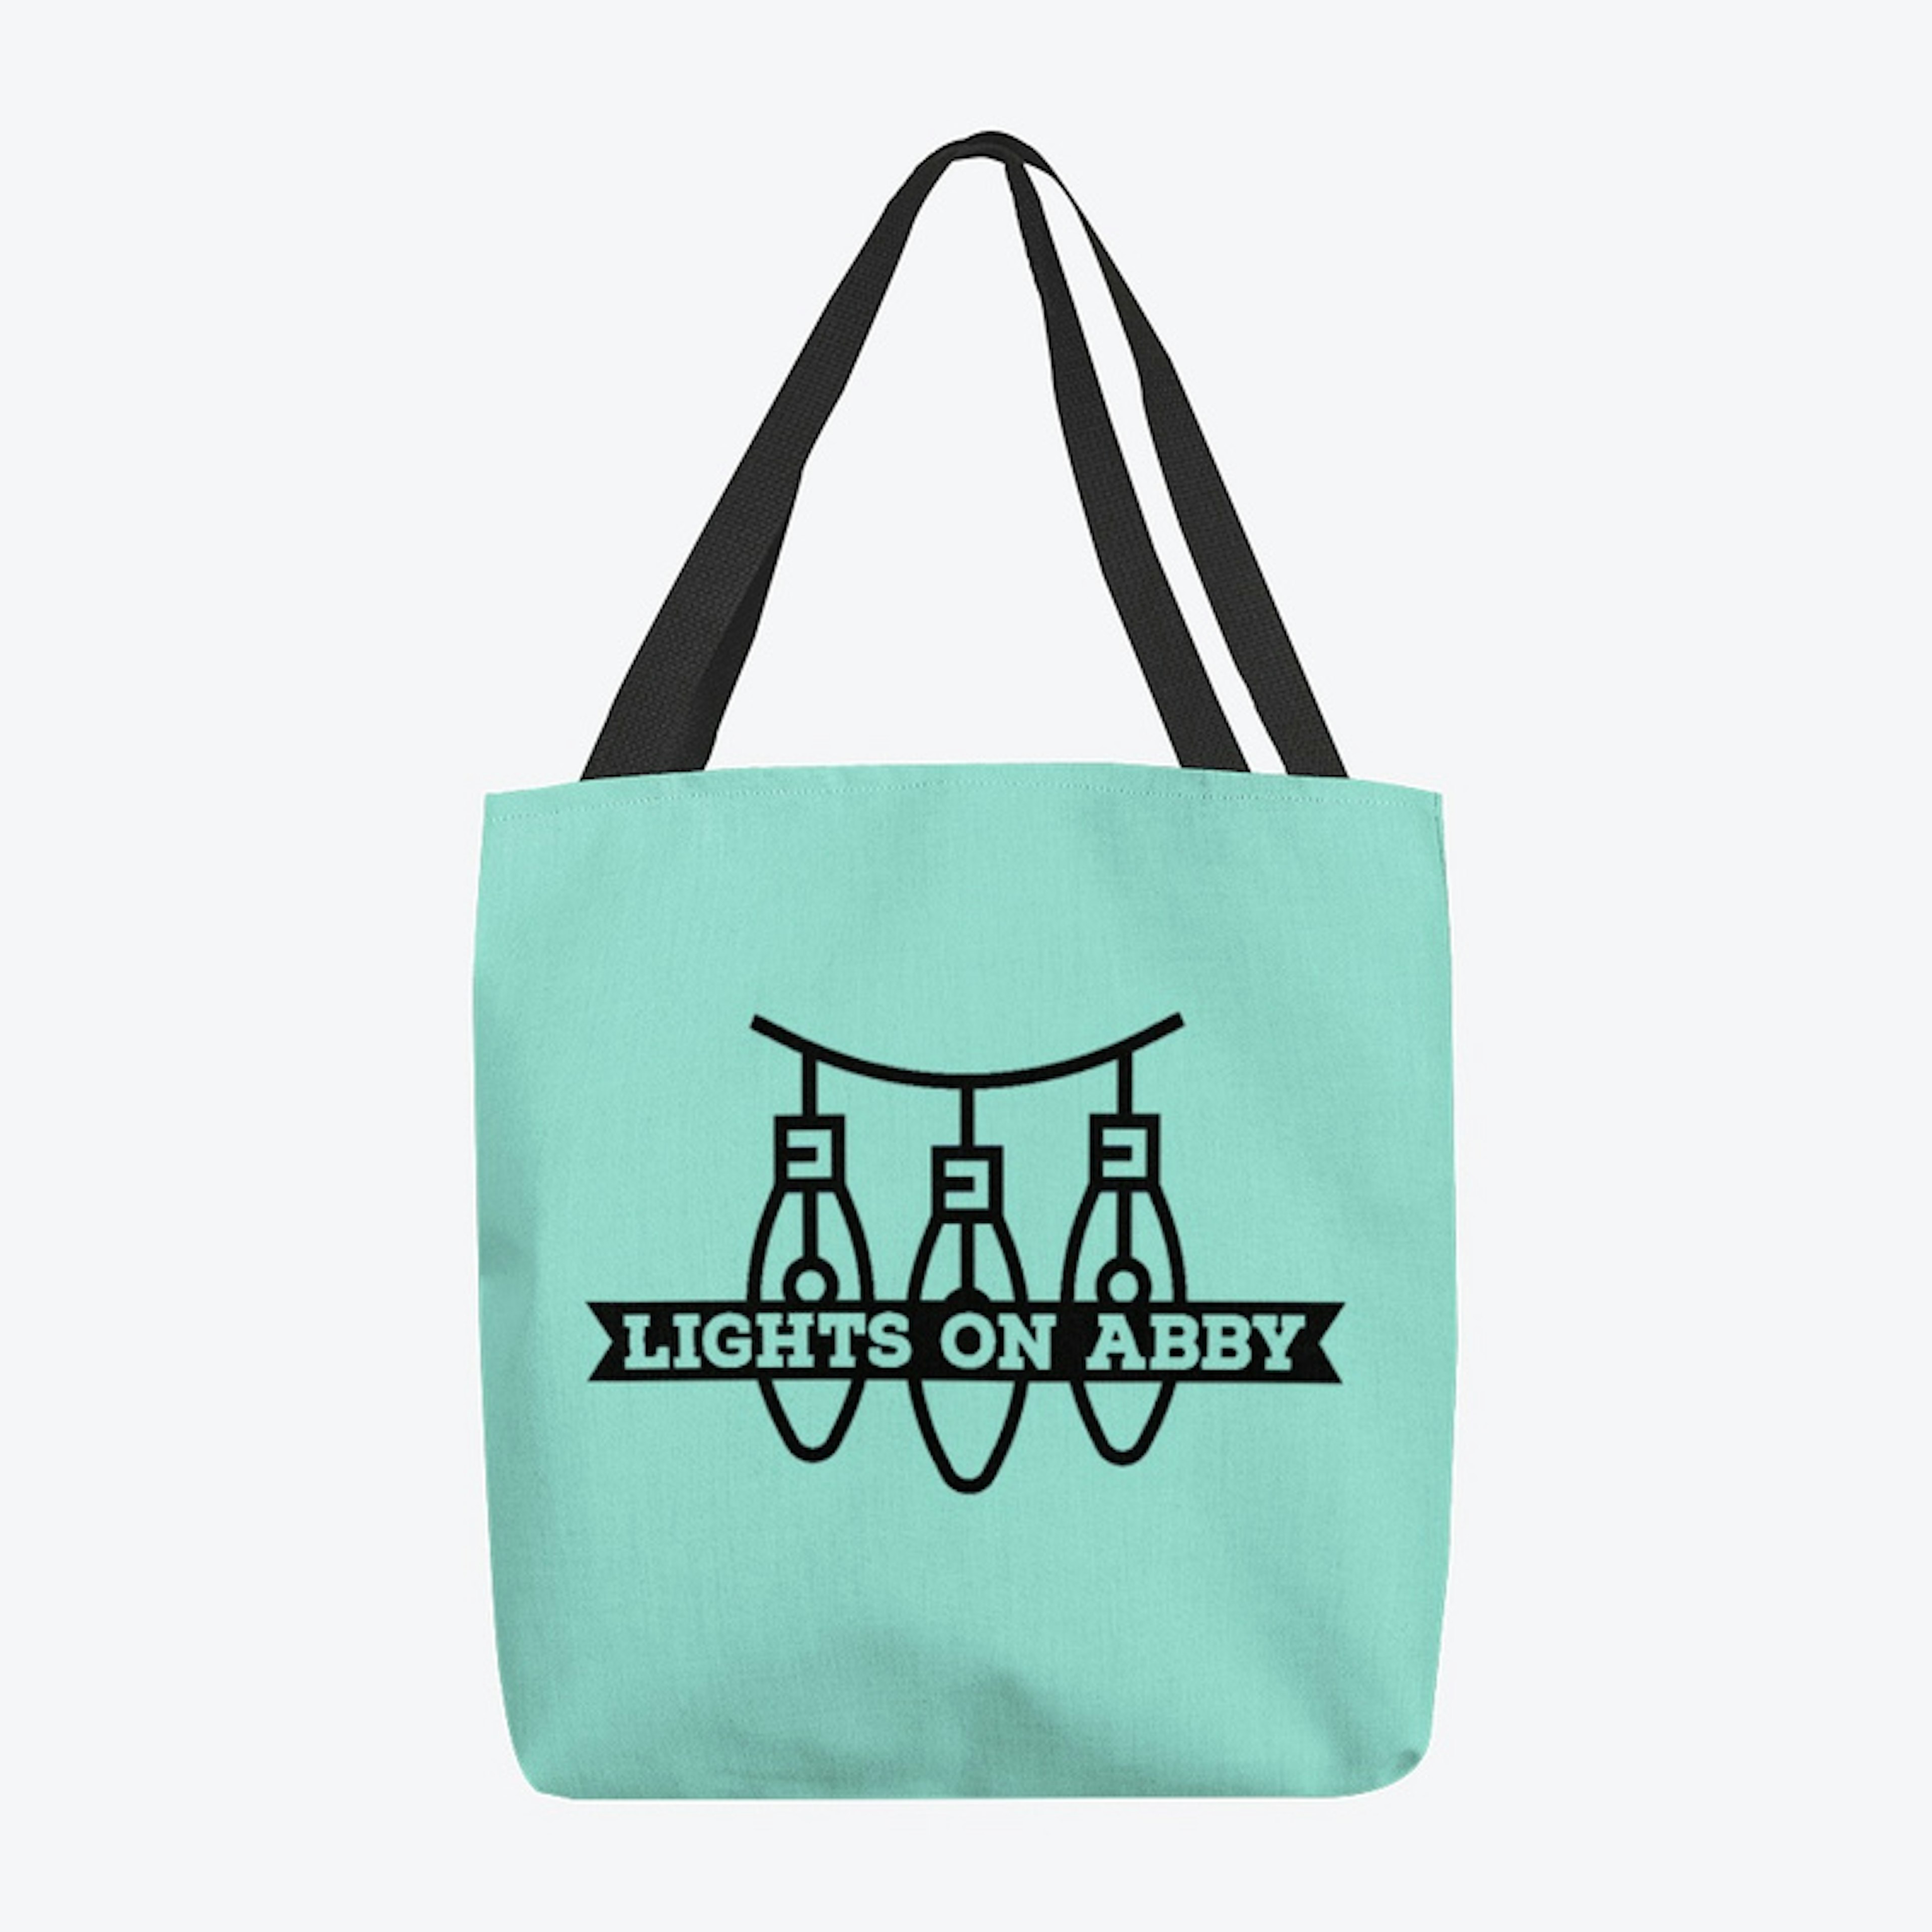 Lights on Abby Tote - BL